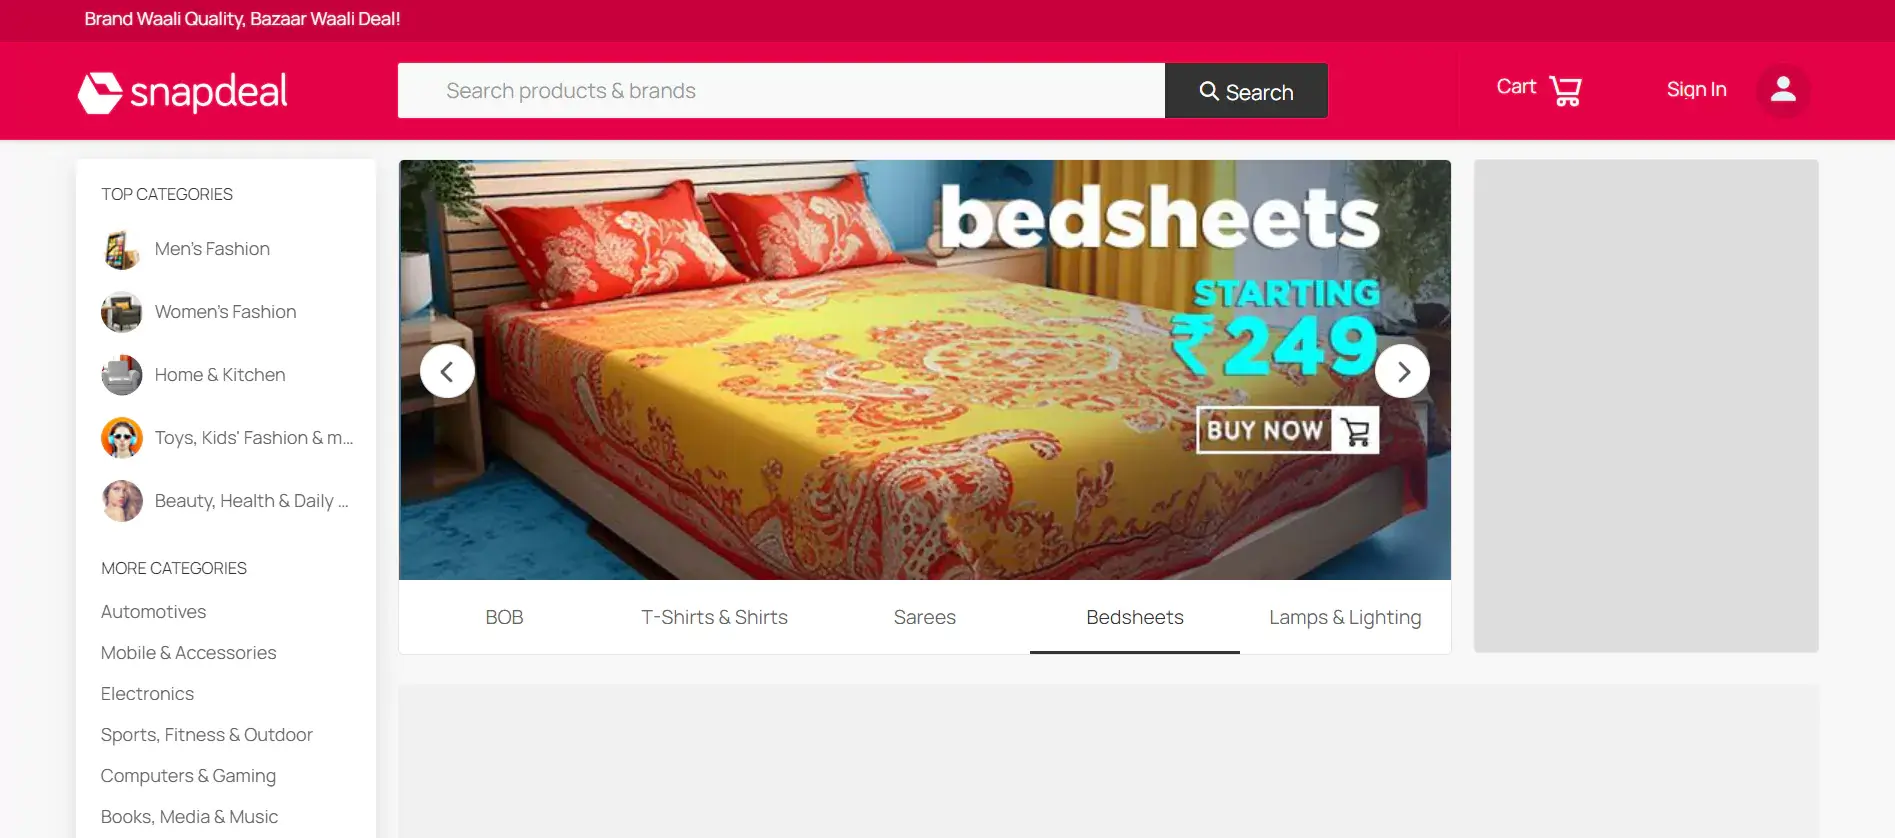 Snapdeal website is an online variety shopping platform